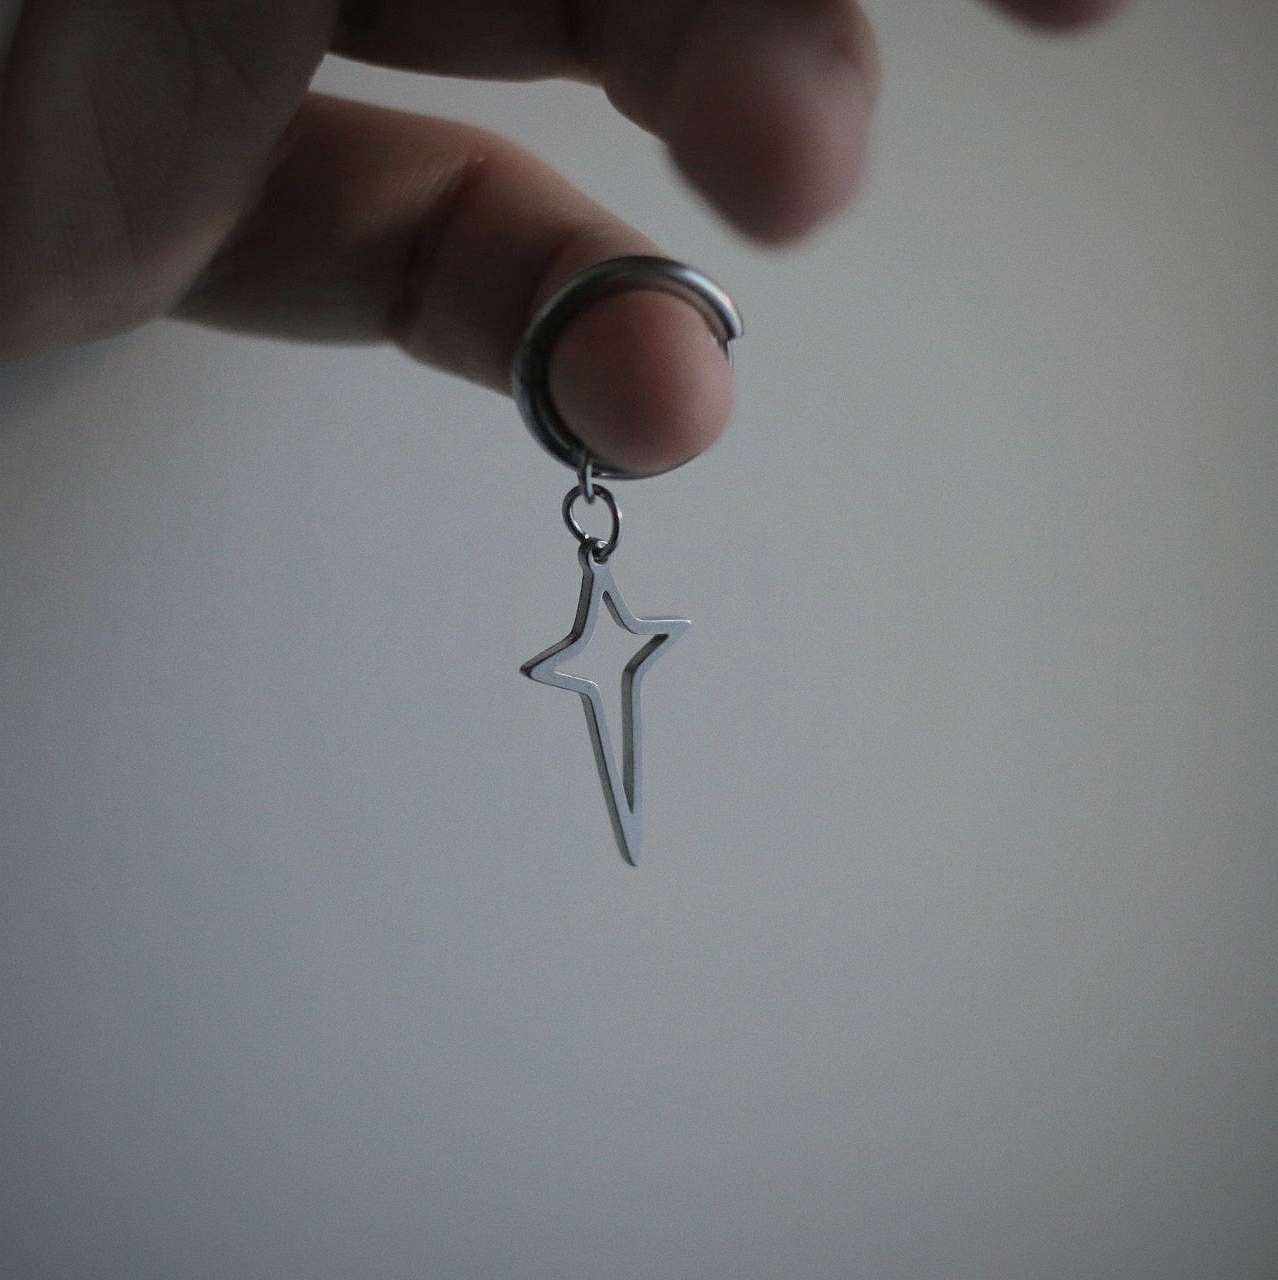 Monora *Starship* Earring - Soar with Starship-Inspired Style